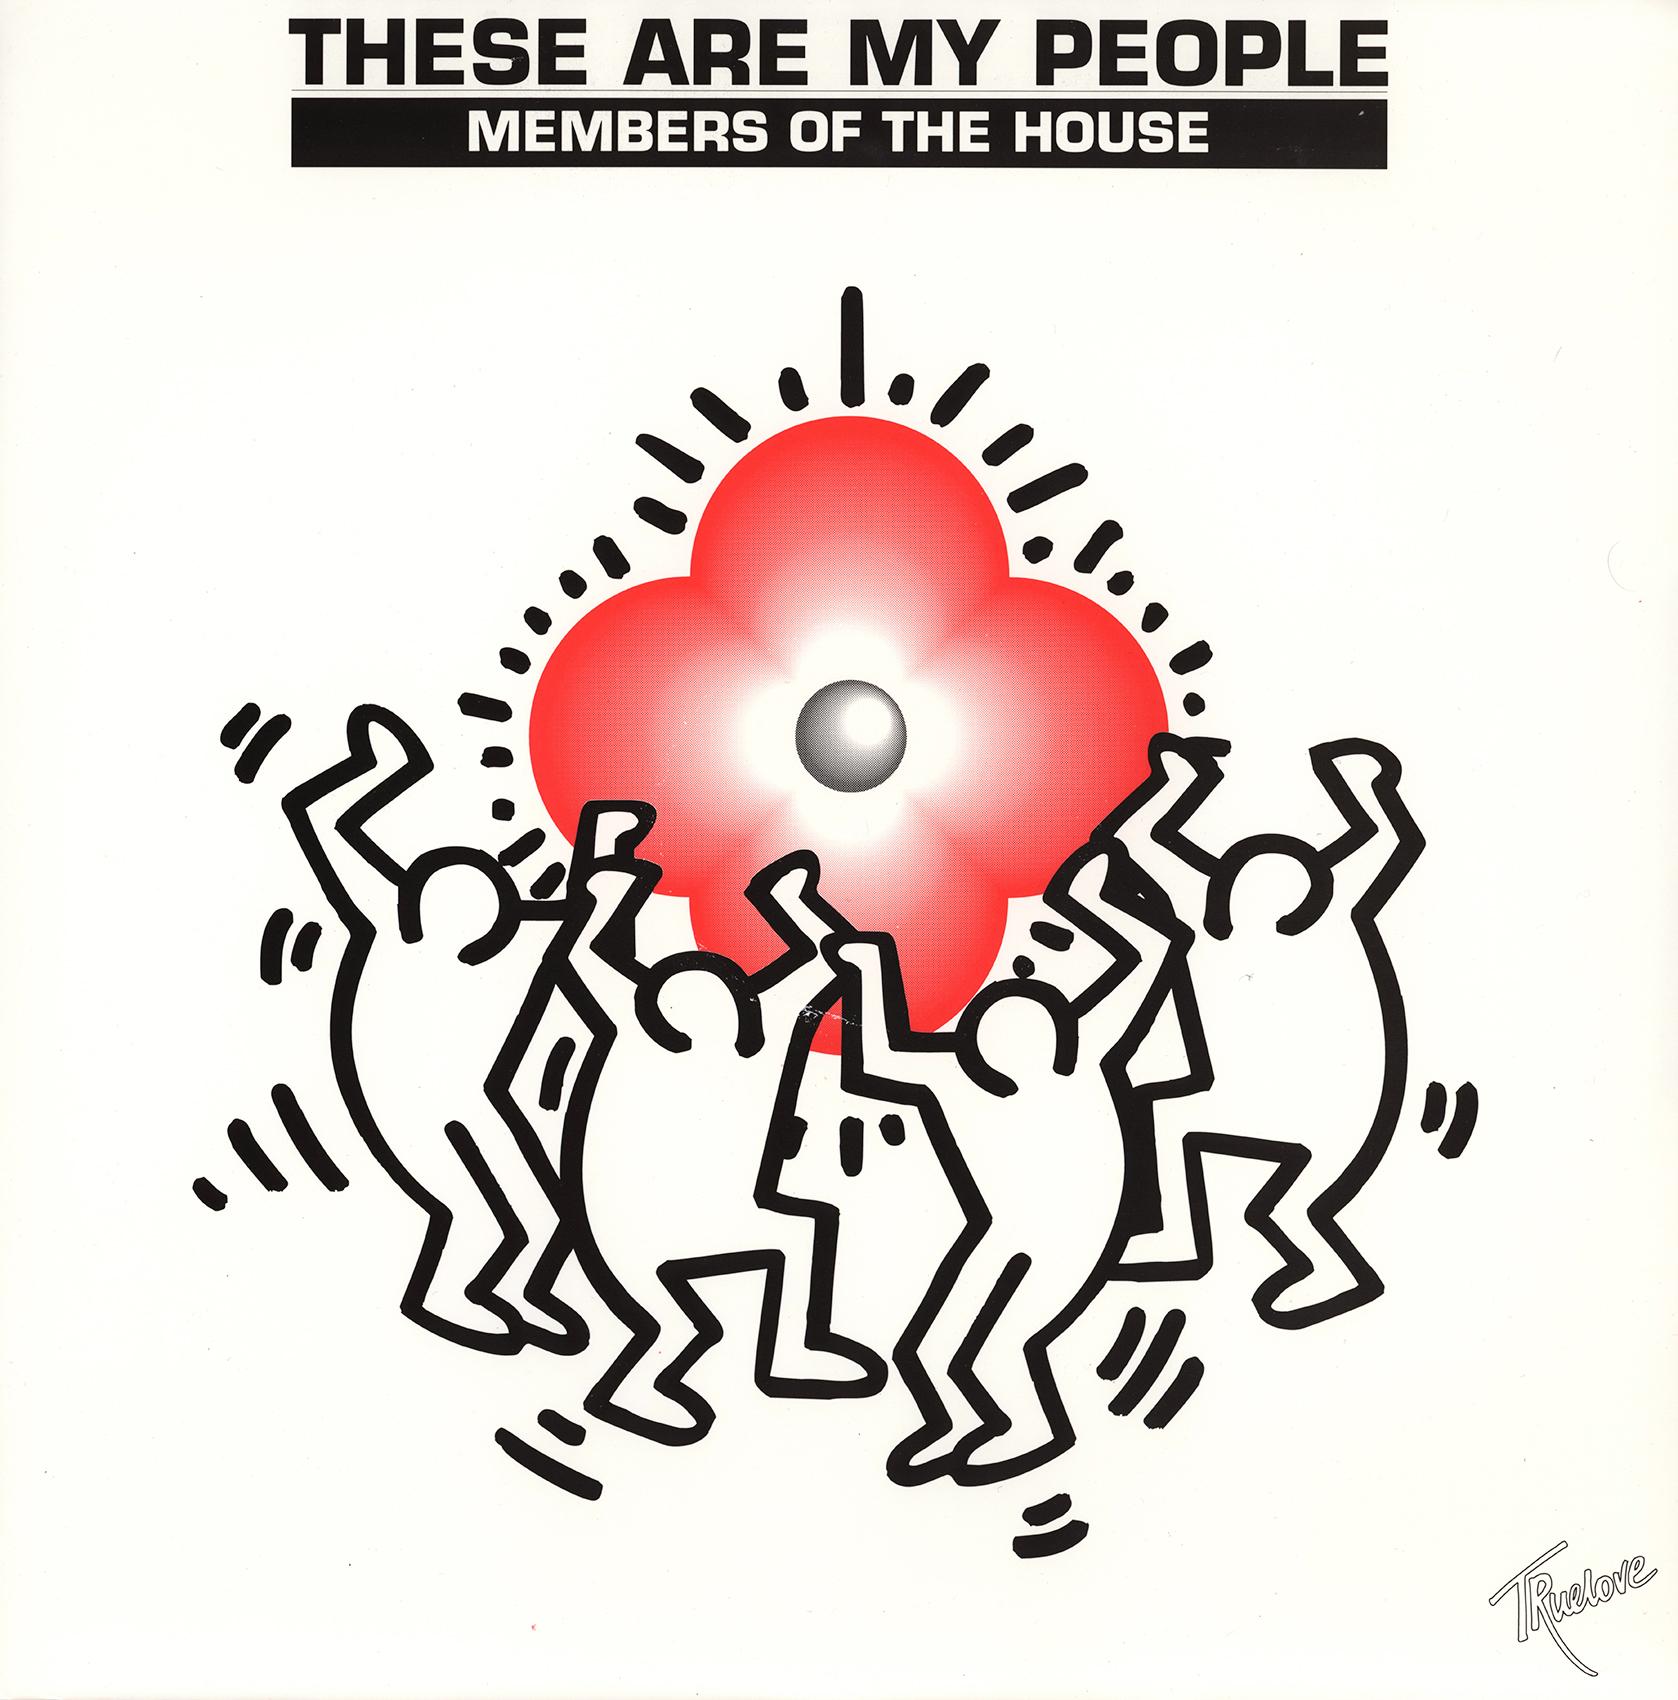 Rare Keith Haring Record Art (set of 3 works) 1991-1992:

Medium: 3 off-set printed record covers, 1991-1992:

Offset lithograph on record album covers featuring licensed 1980s Haring artwork.

Dimensions: 12 x 12 inches.
Minor shelf wear;